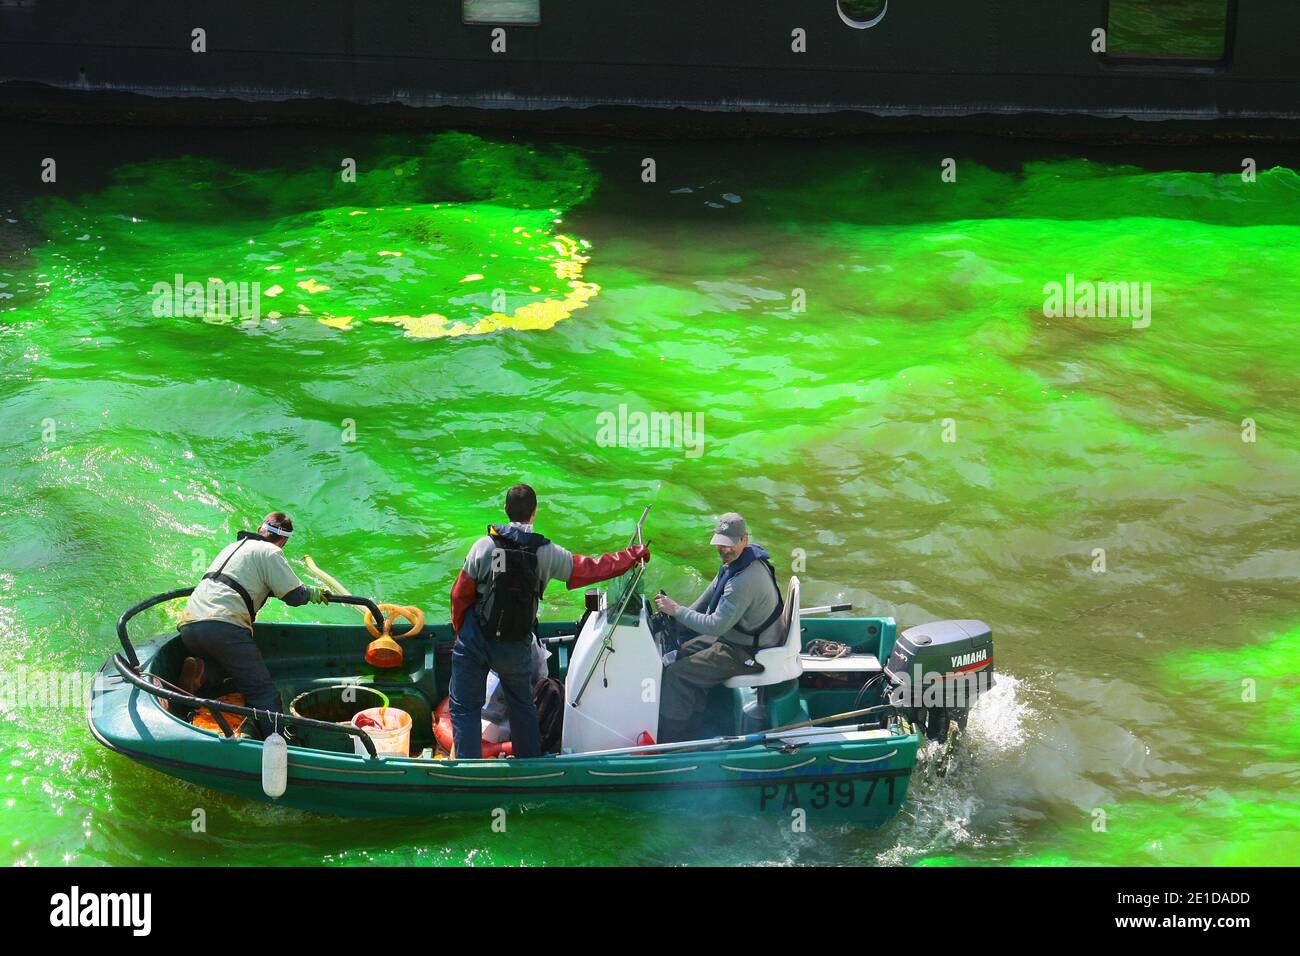 Environment emplyees tip a fluorescent product into the river Seine, Paris, France on March 22, 2011, as part of the World Water Day celebrations. The UN's food agency marked World Water Day, today by calling for new and innovative approaches to ensuring city dwellers in developing countries have access to safe and adequate water supplies. Photo by David Fritz/ABACAPRESS.COM Stock Photo